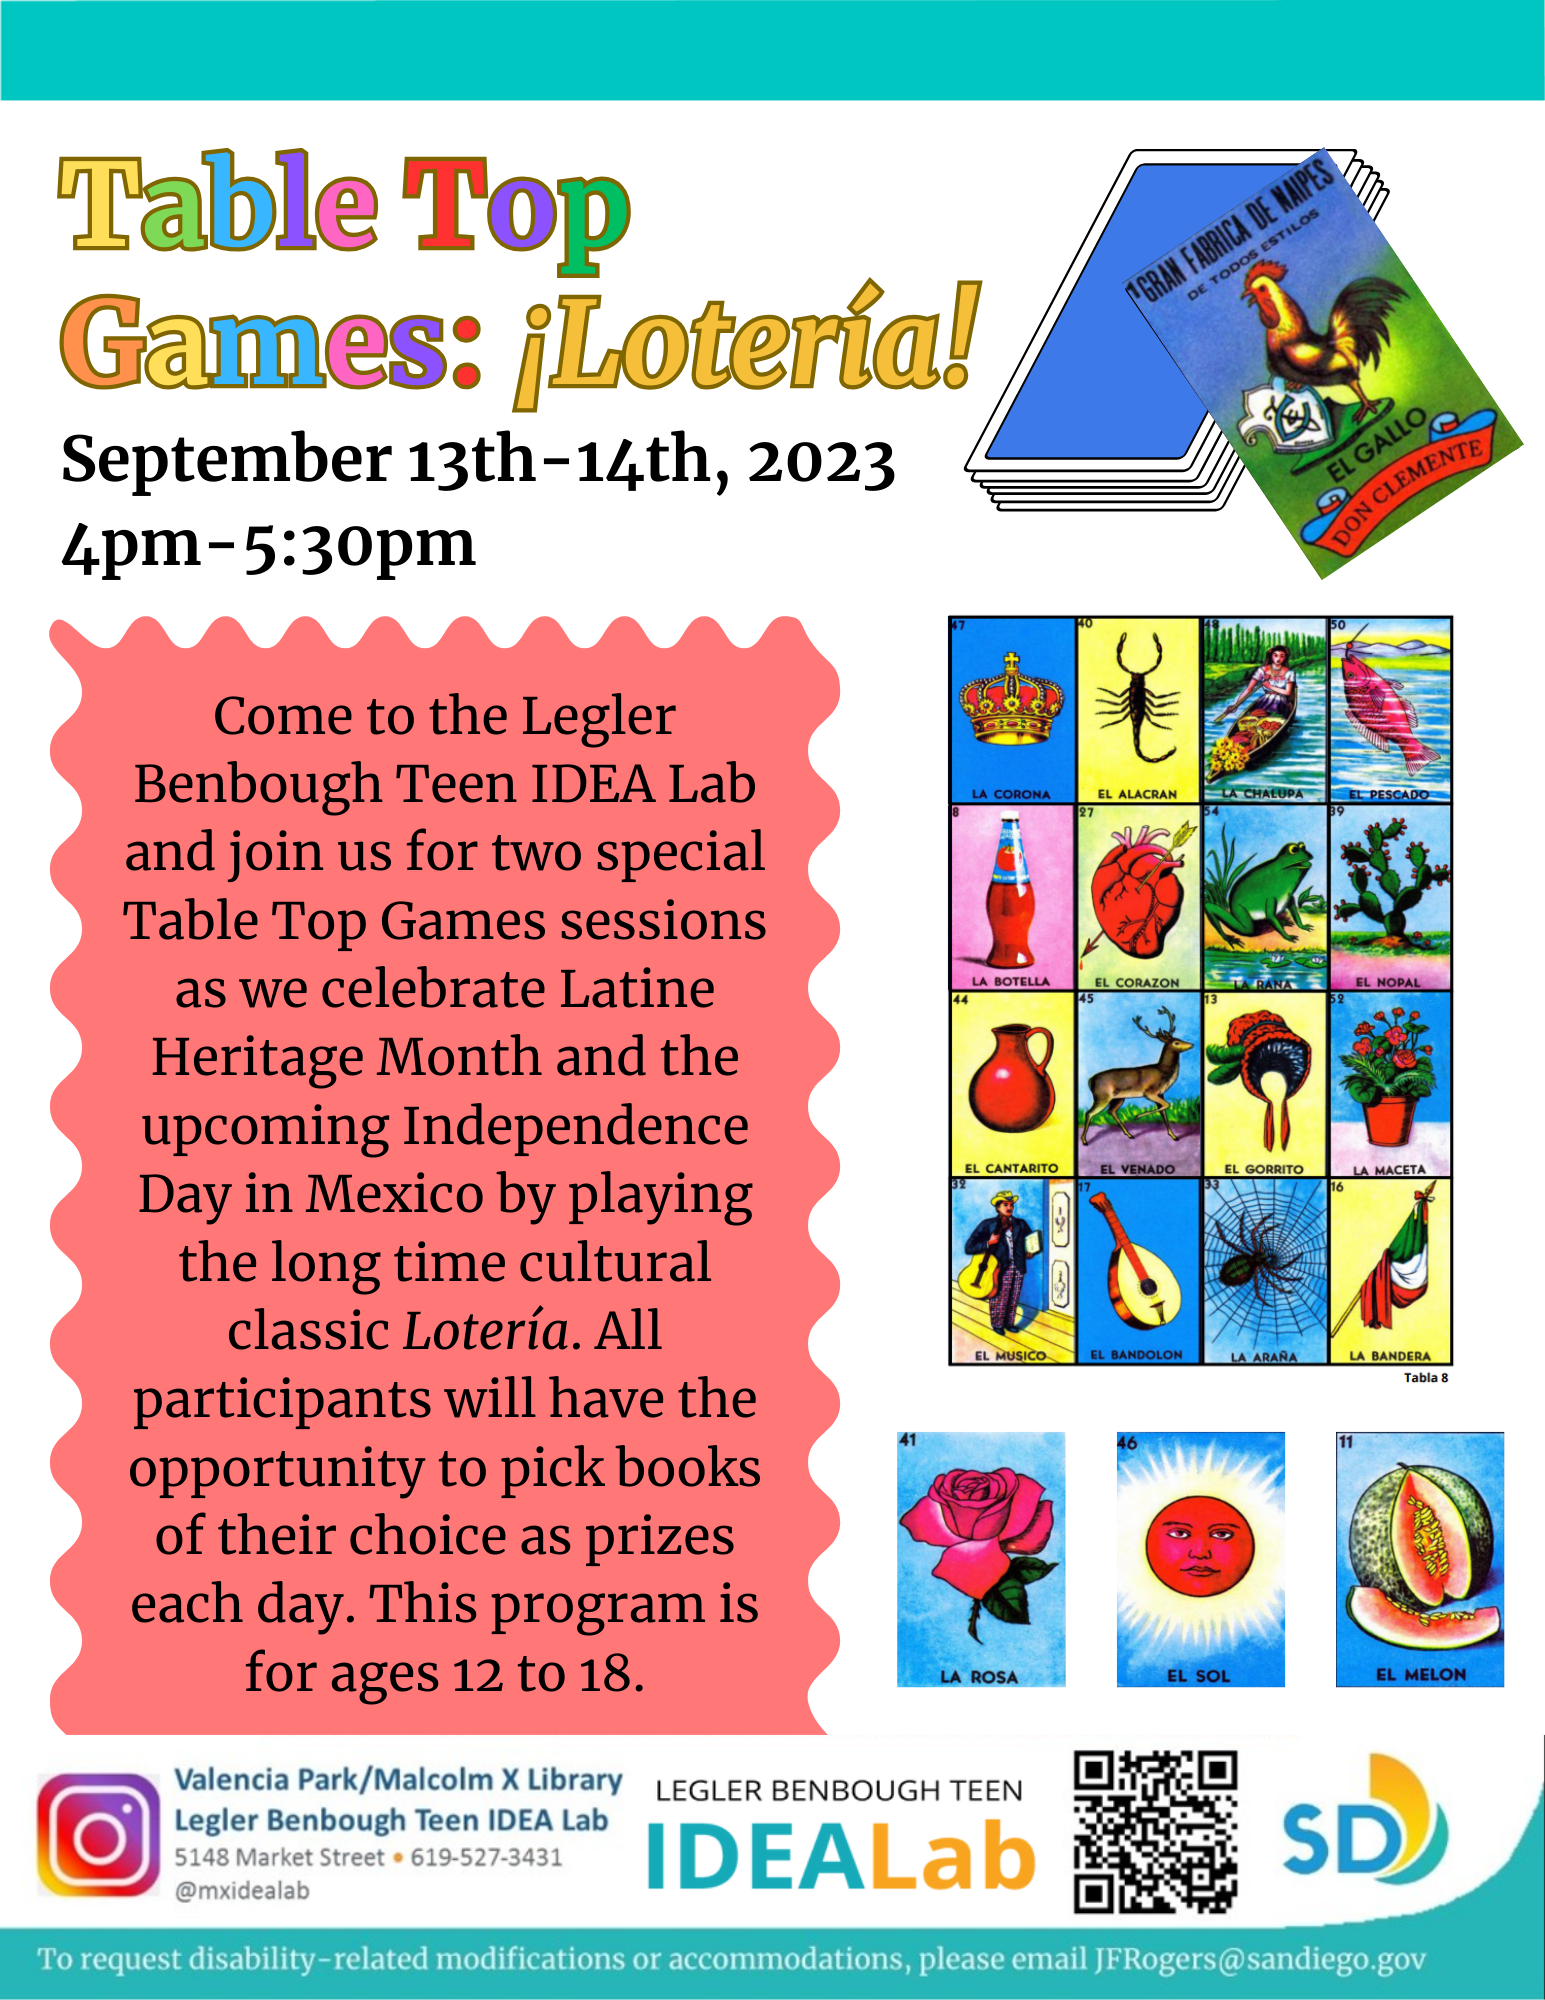 Flyer advertising a special Table Top Games program for Latine Heritage month to play Loteria.